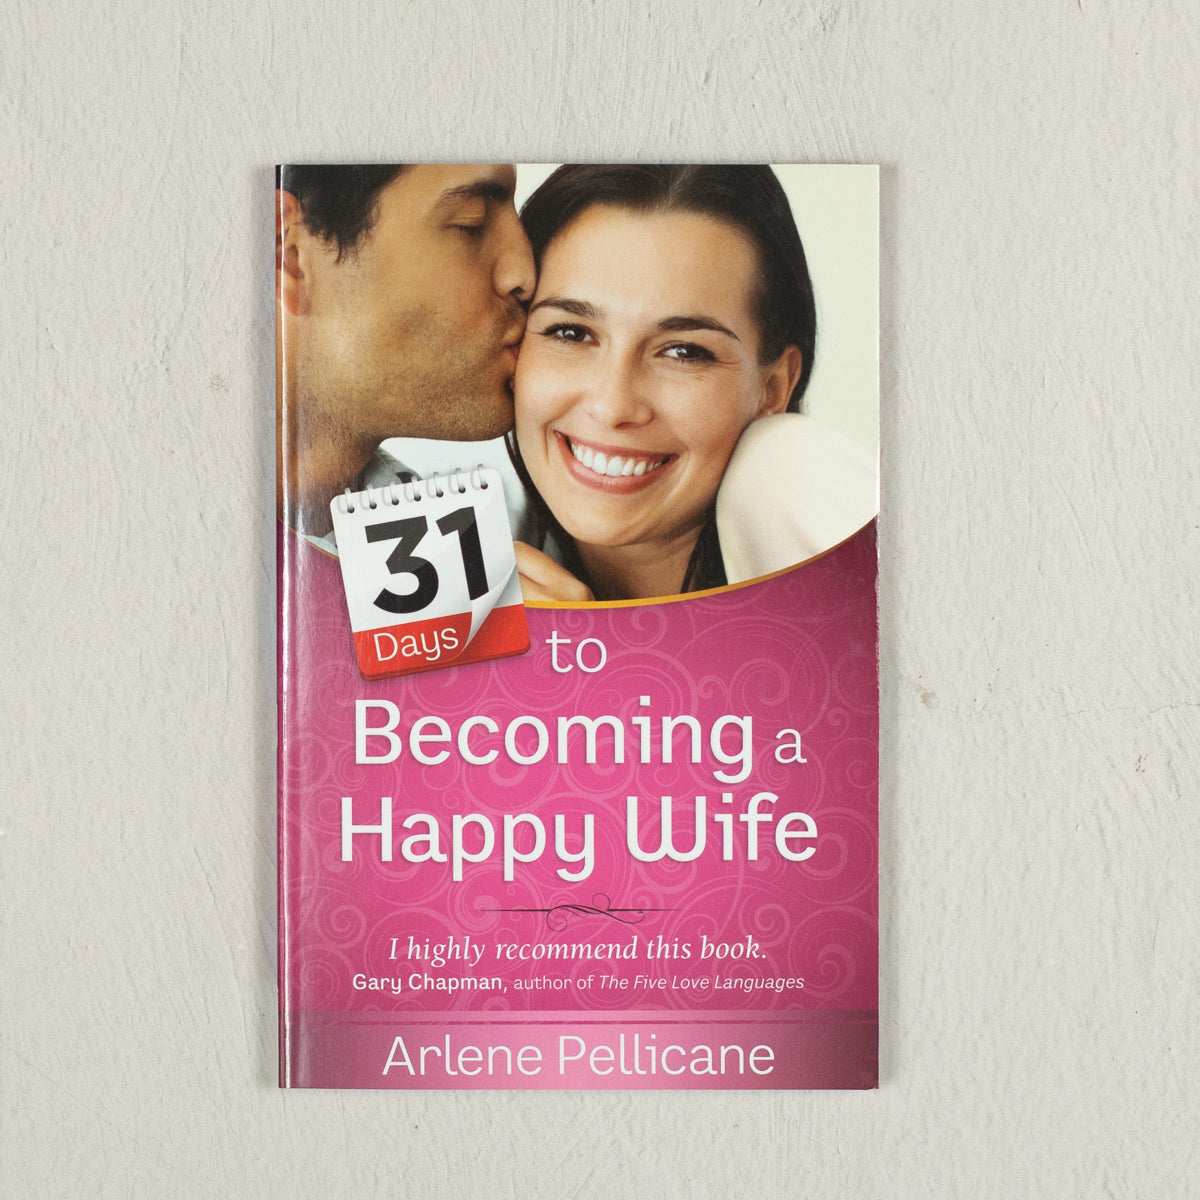 31 Days to Becoming a Happy Wife